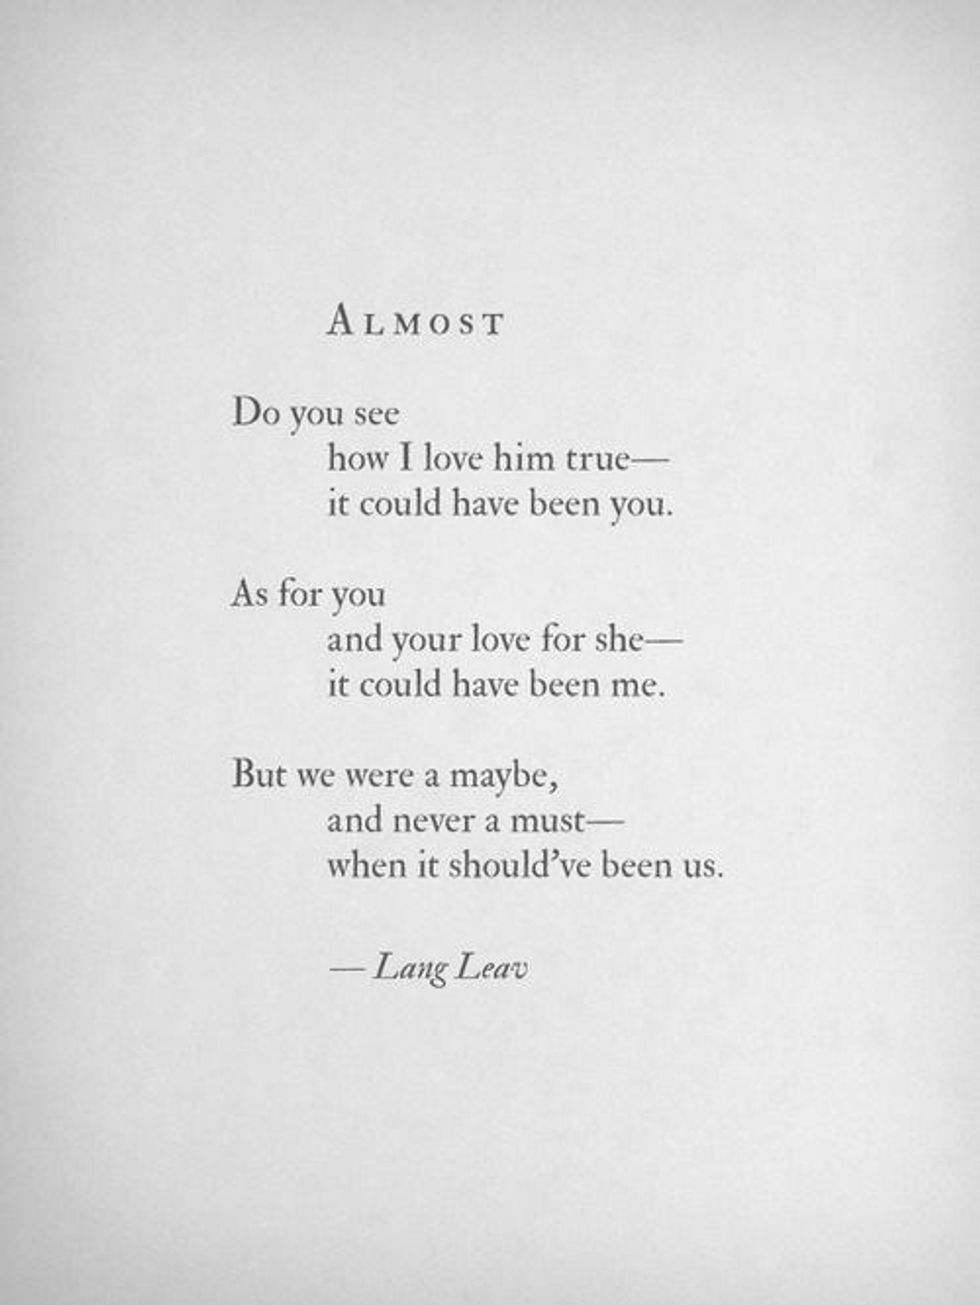 11 Poems By Lang Leav That Will Make You Want To Call Your Ex